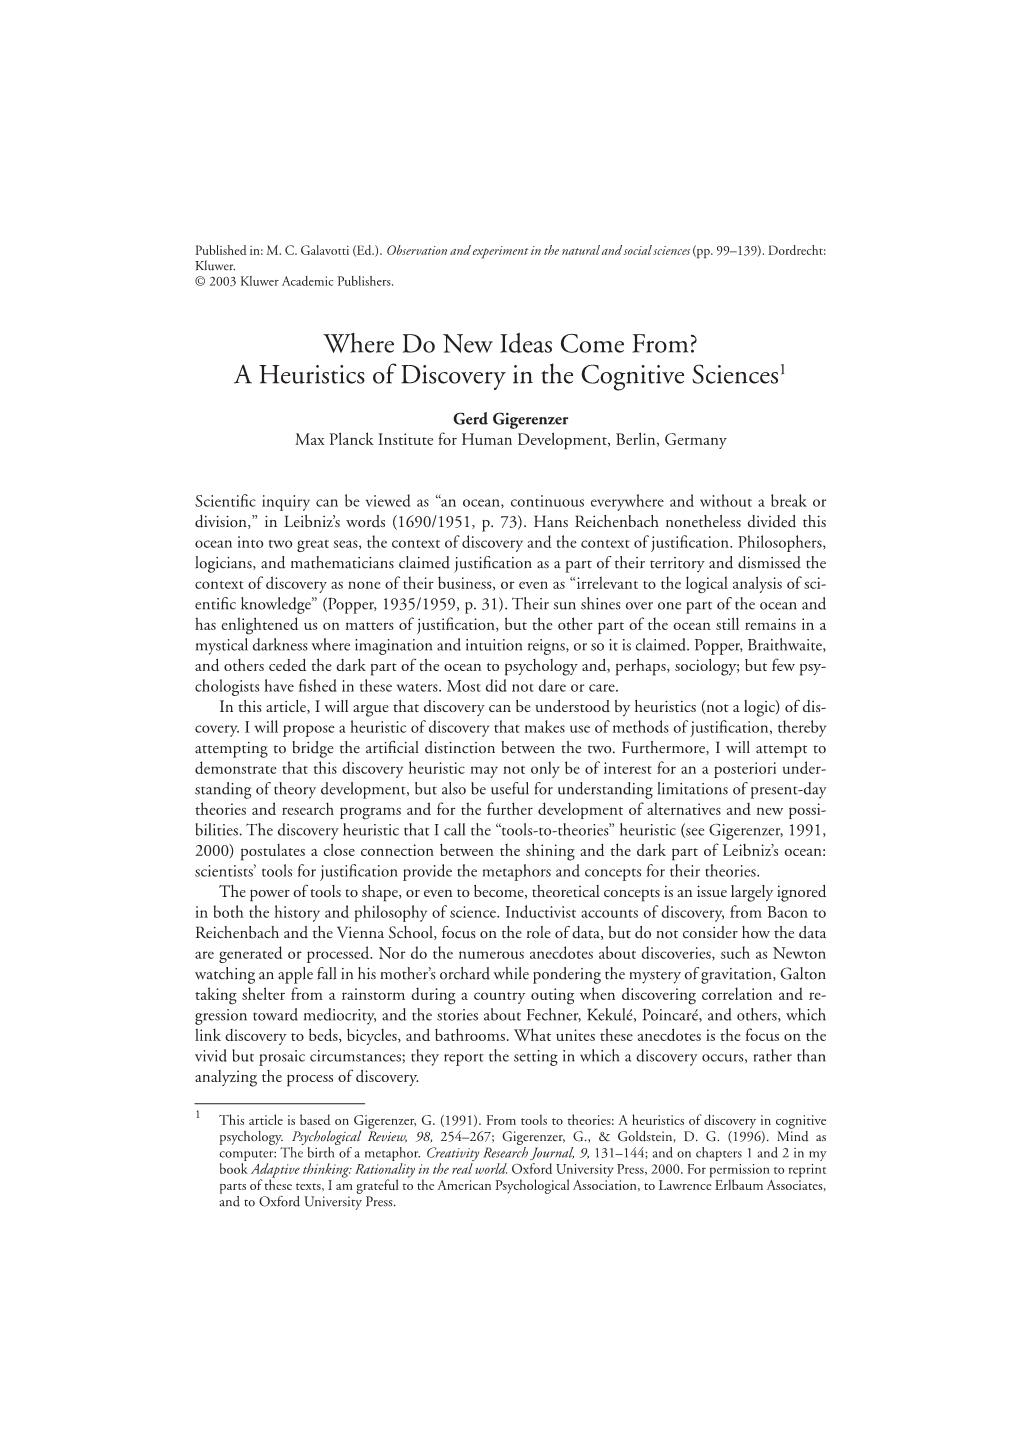 Where Do New Ideas Come From? a Heuristics of Discovery in the Cognitive Sciences1